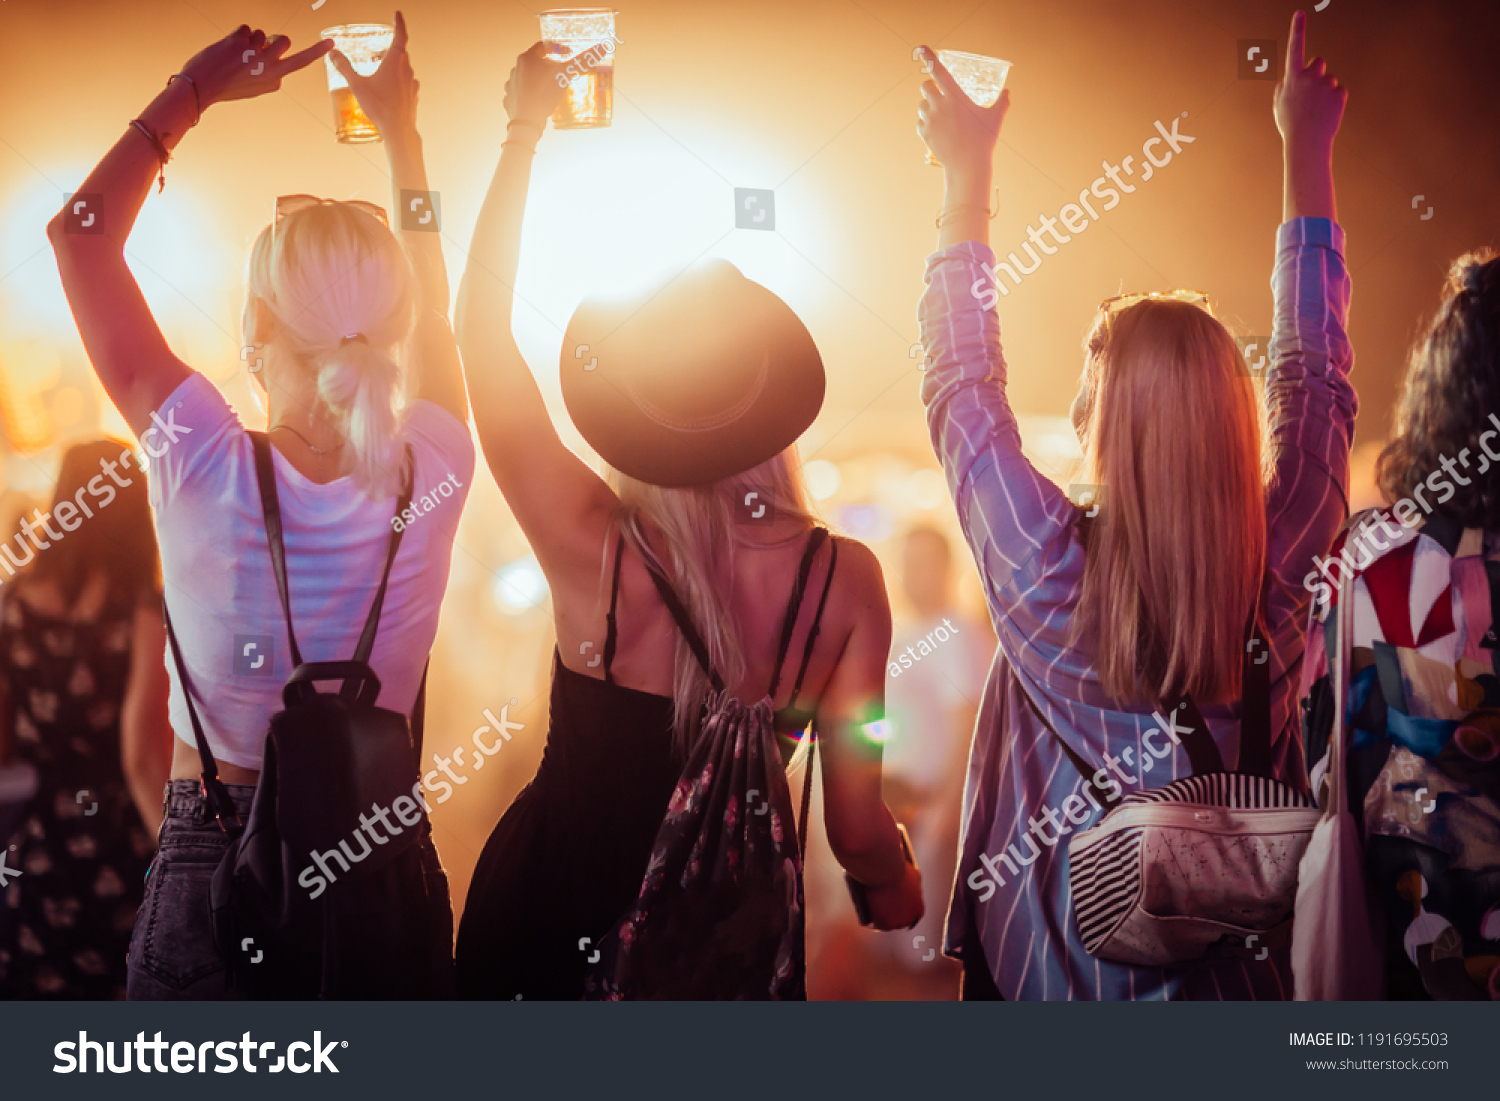 Back view of group of female friends at music festival drinking beer and dancing #1191695503